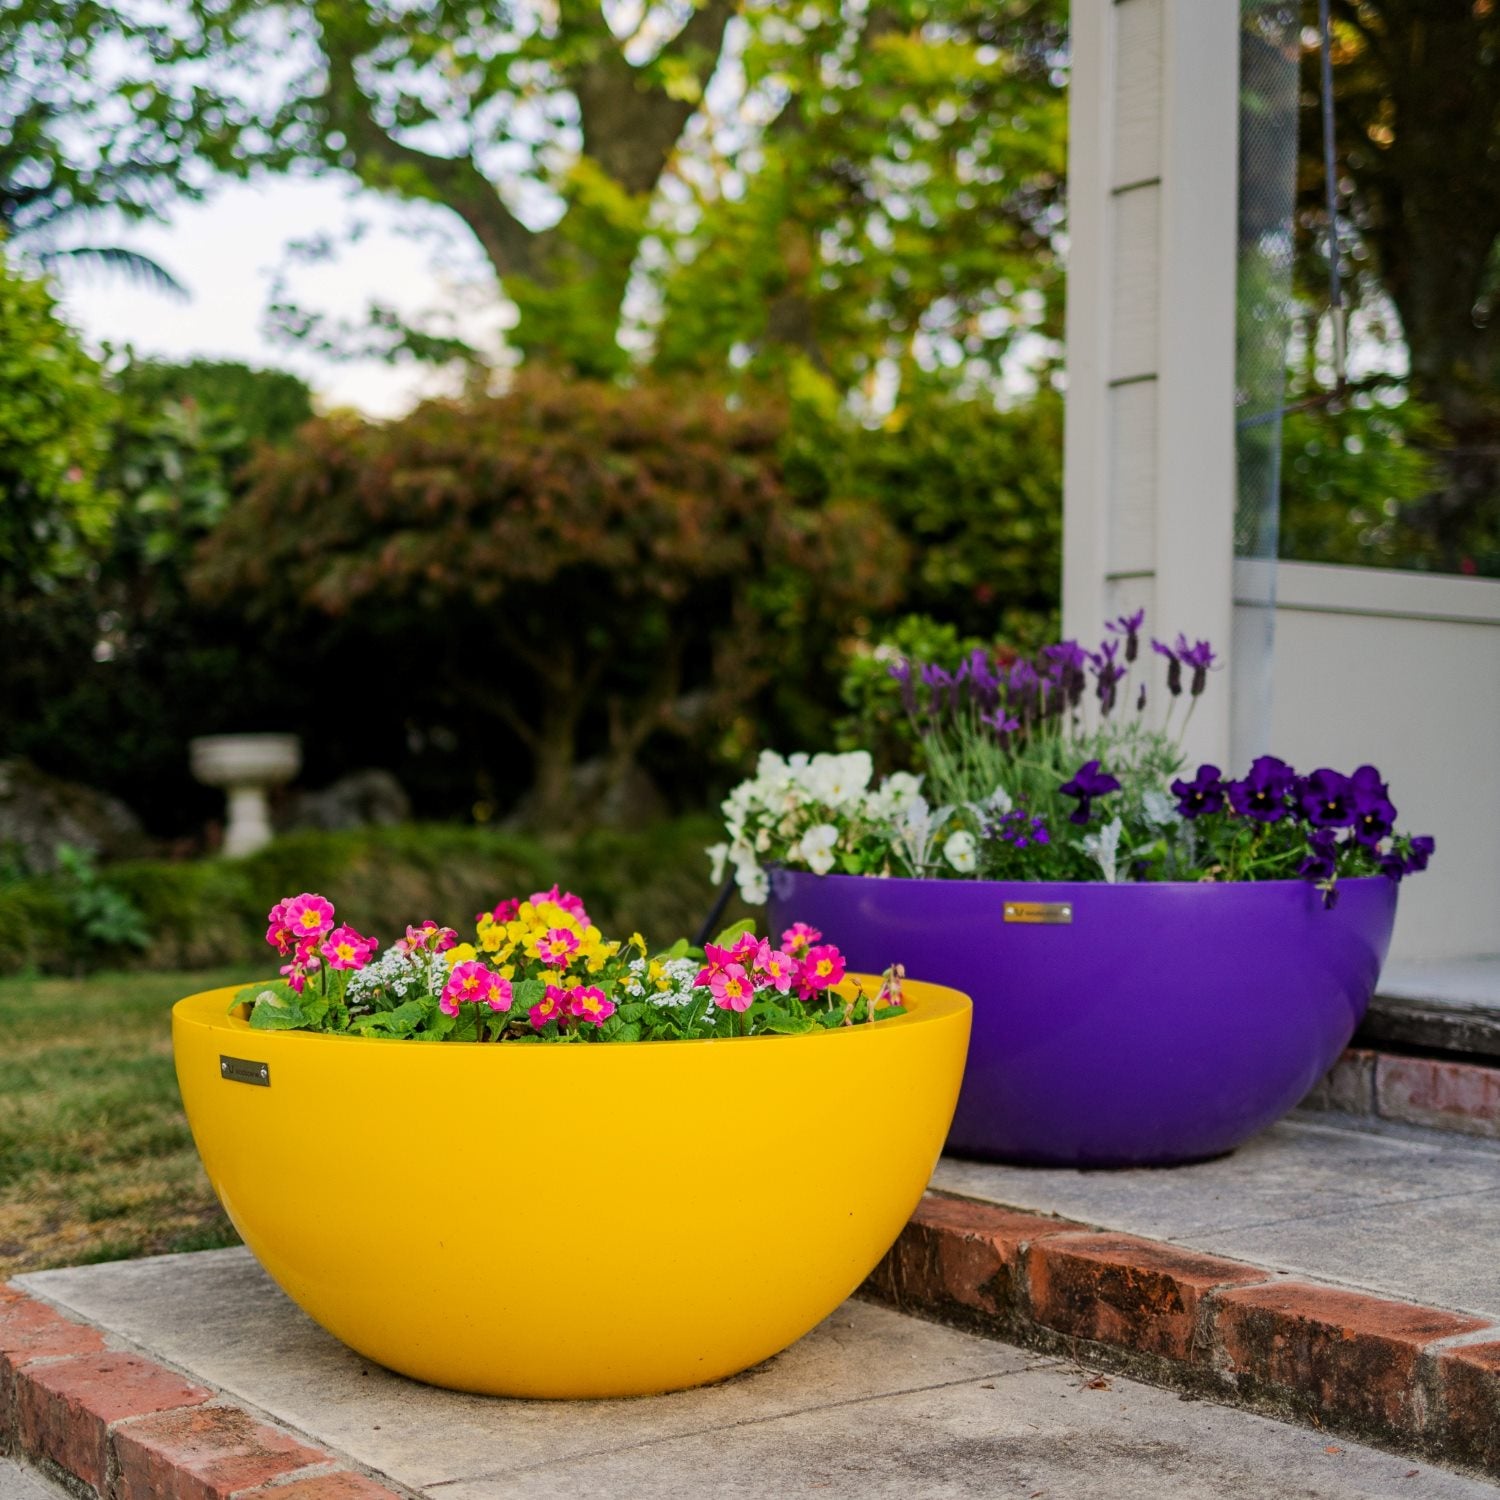 Large colourful planter bowls by Modscene. The planters are on a flight of stairs, and have flowers in them.